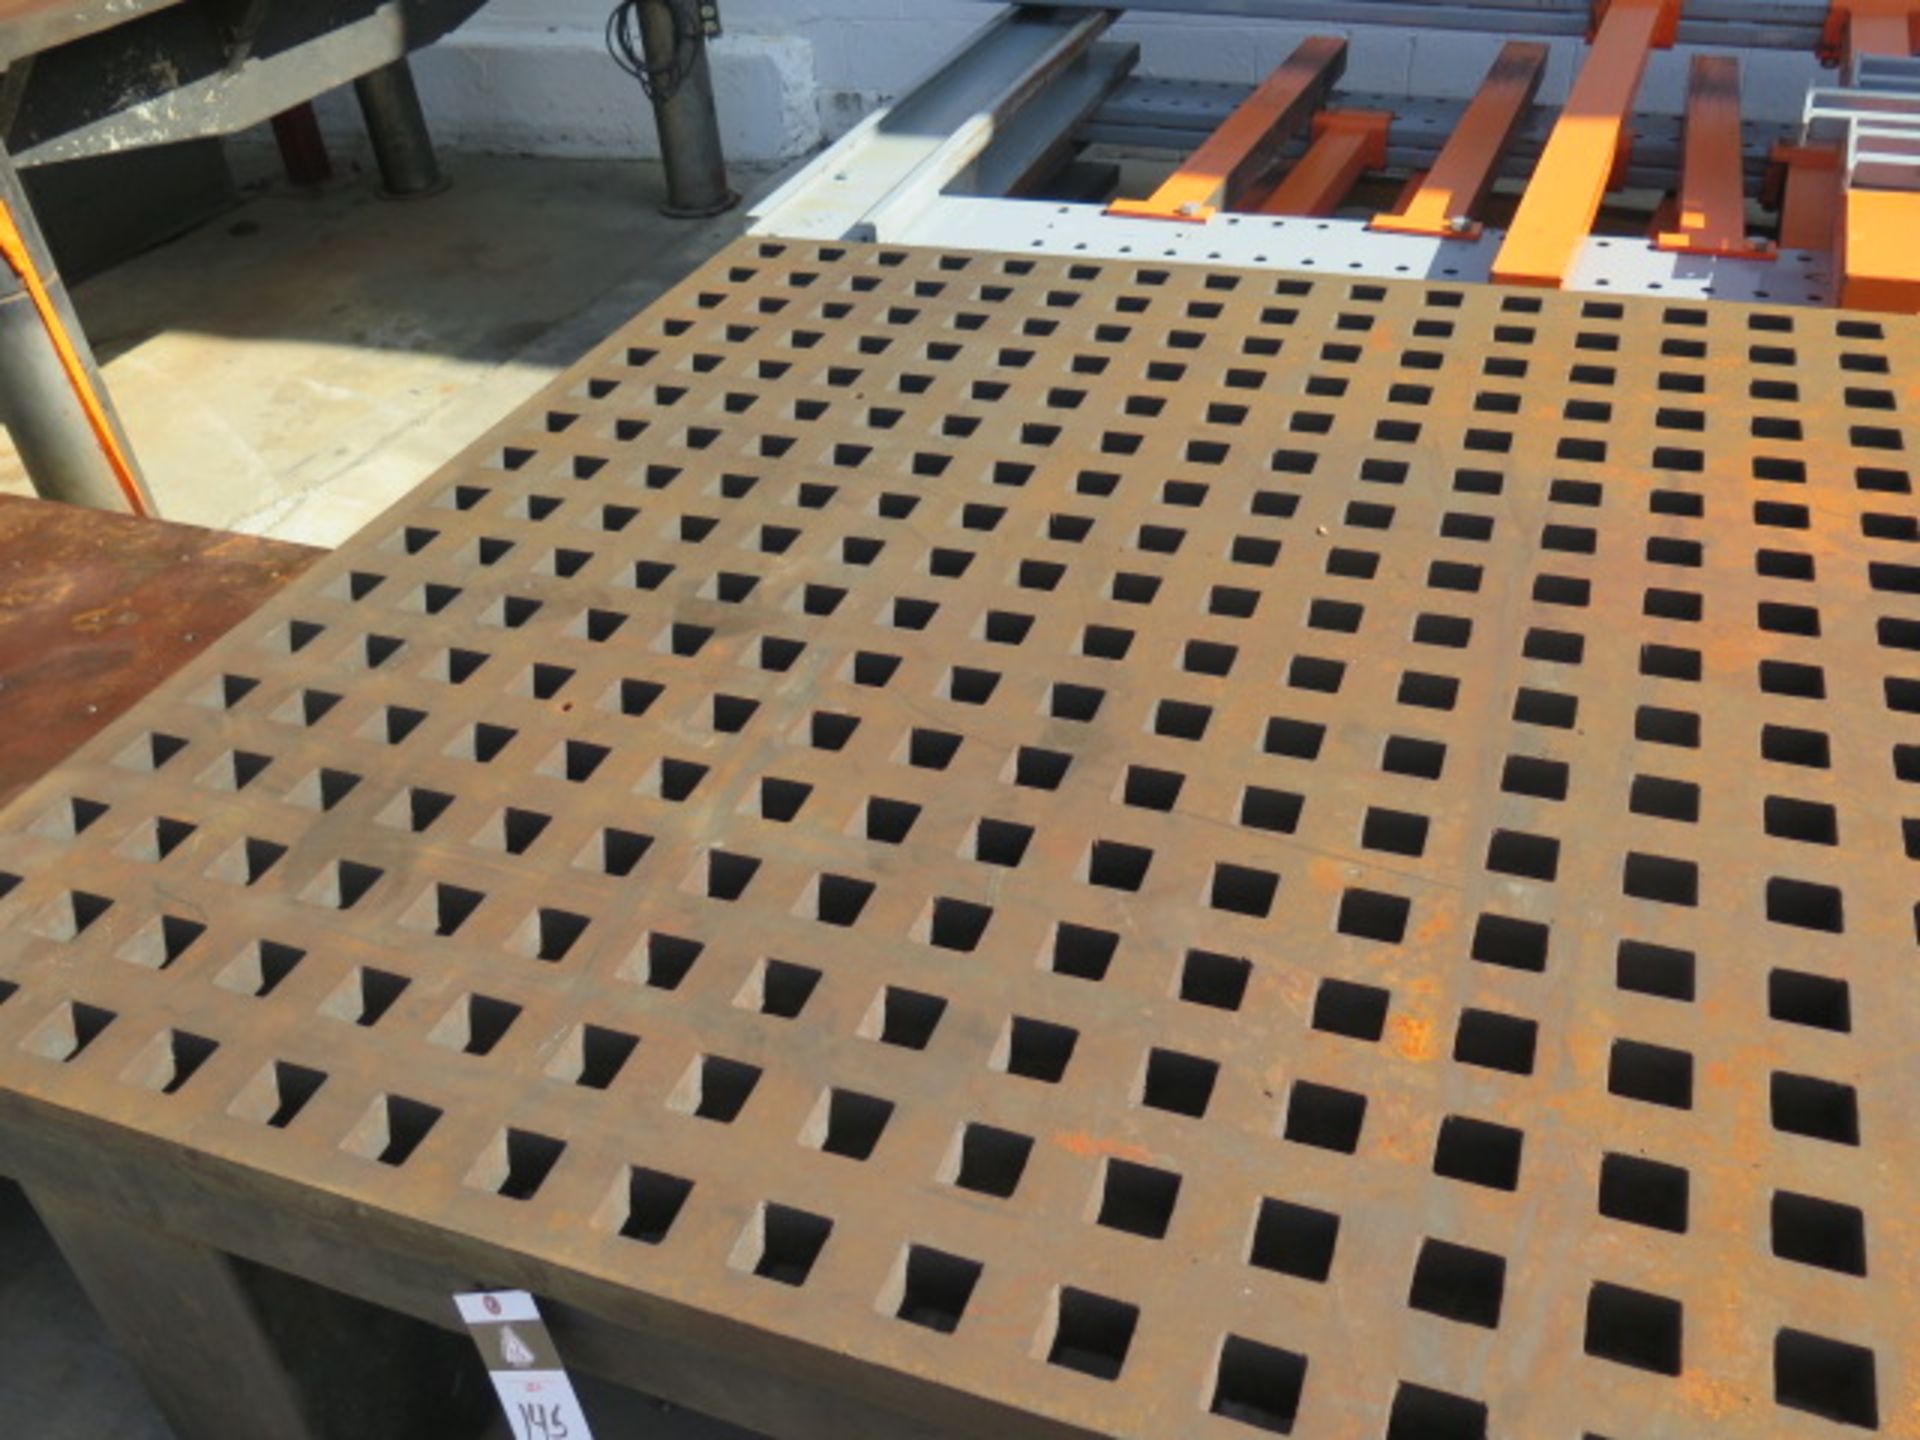 60" x 96" Acorn Style Fabrication Table (SOLD AS-IS - NO WARRANTY) - Image 3 of 6